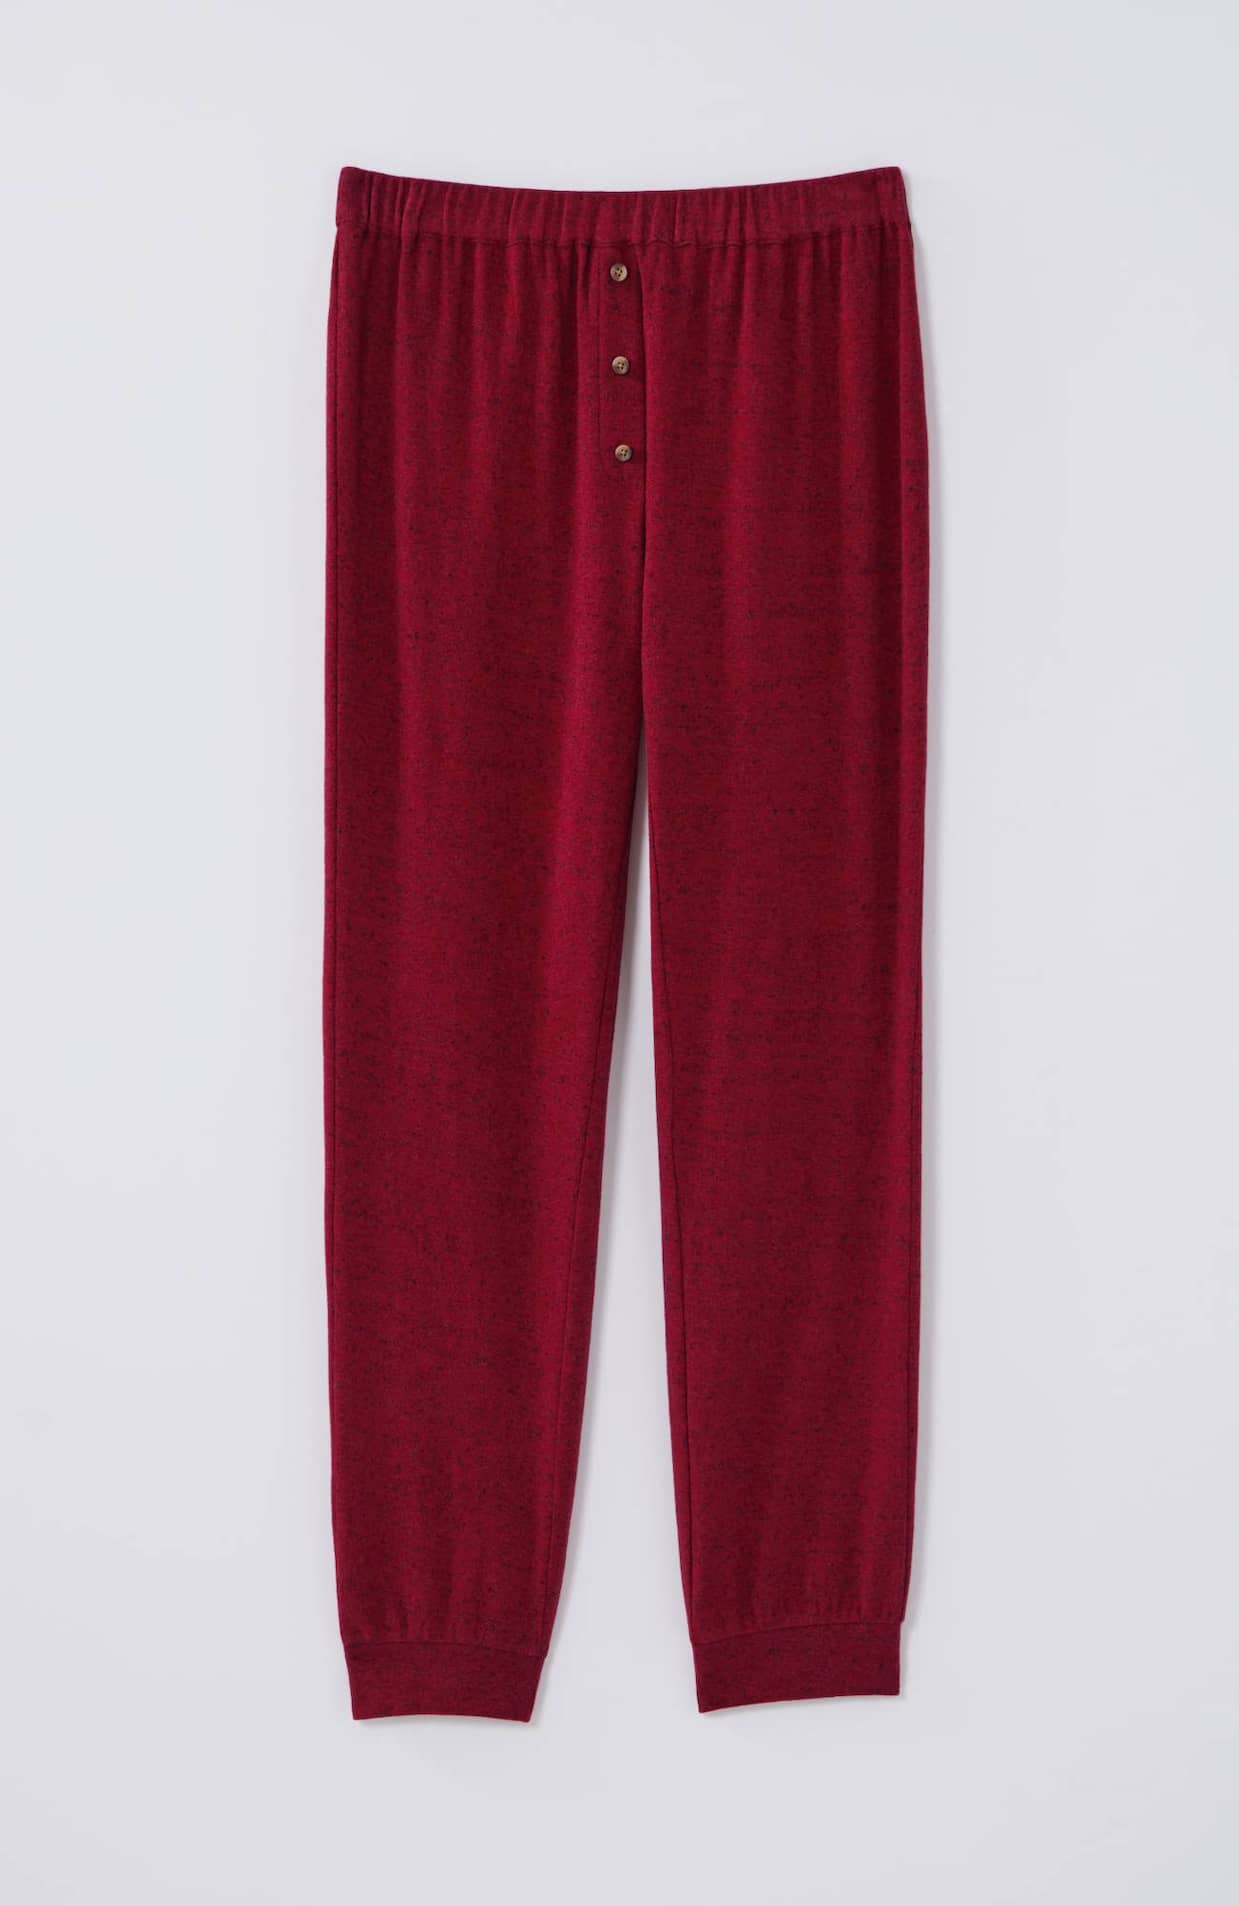 PJ Salvage Dotted Knit Coordinating Sleep Joggers